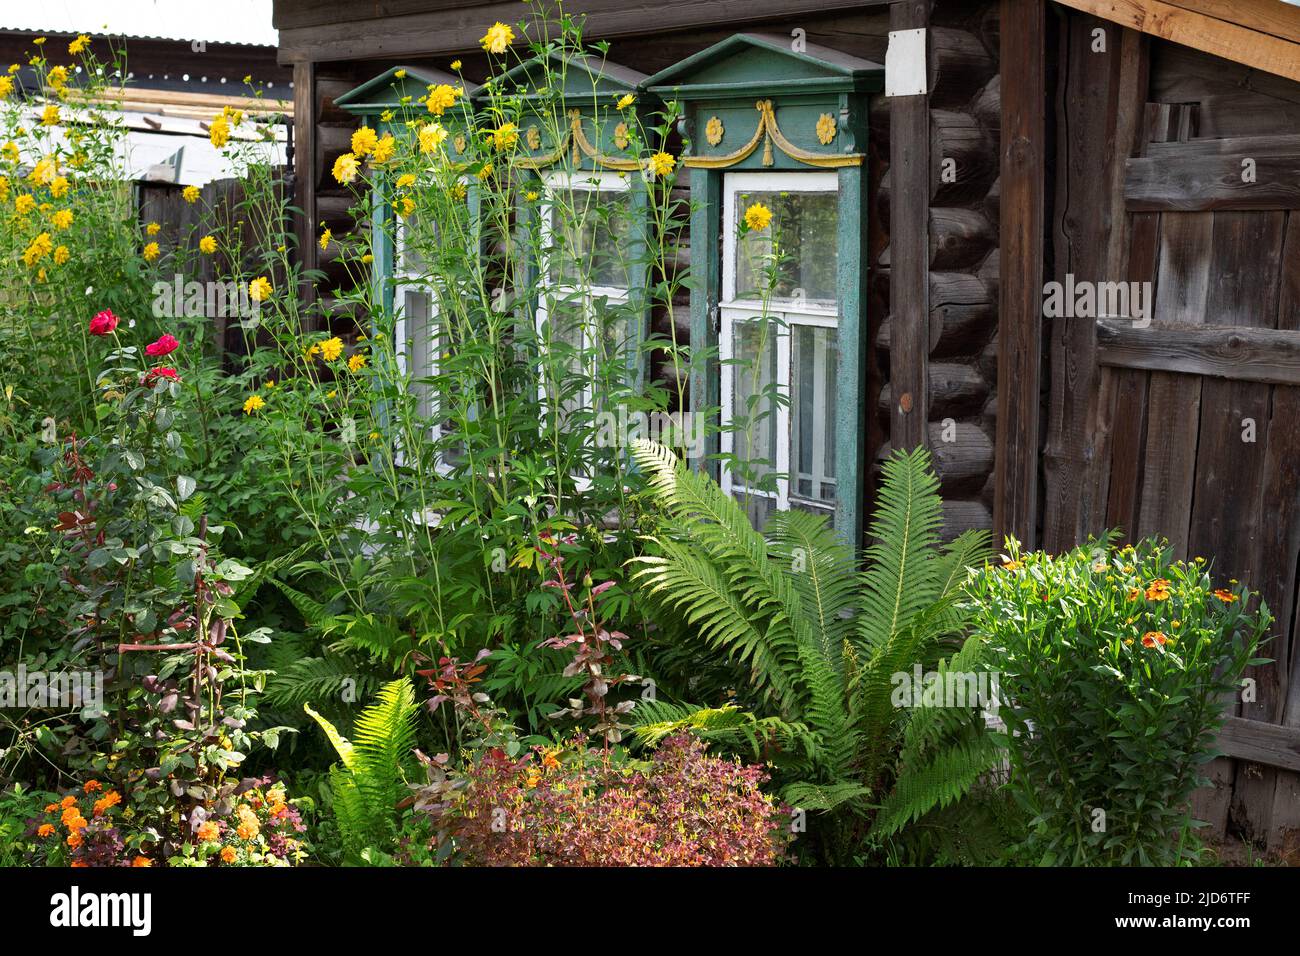 Old brown wooden house with green yellow white carved window frames and flowers in front garden Stock Photo